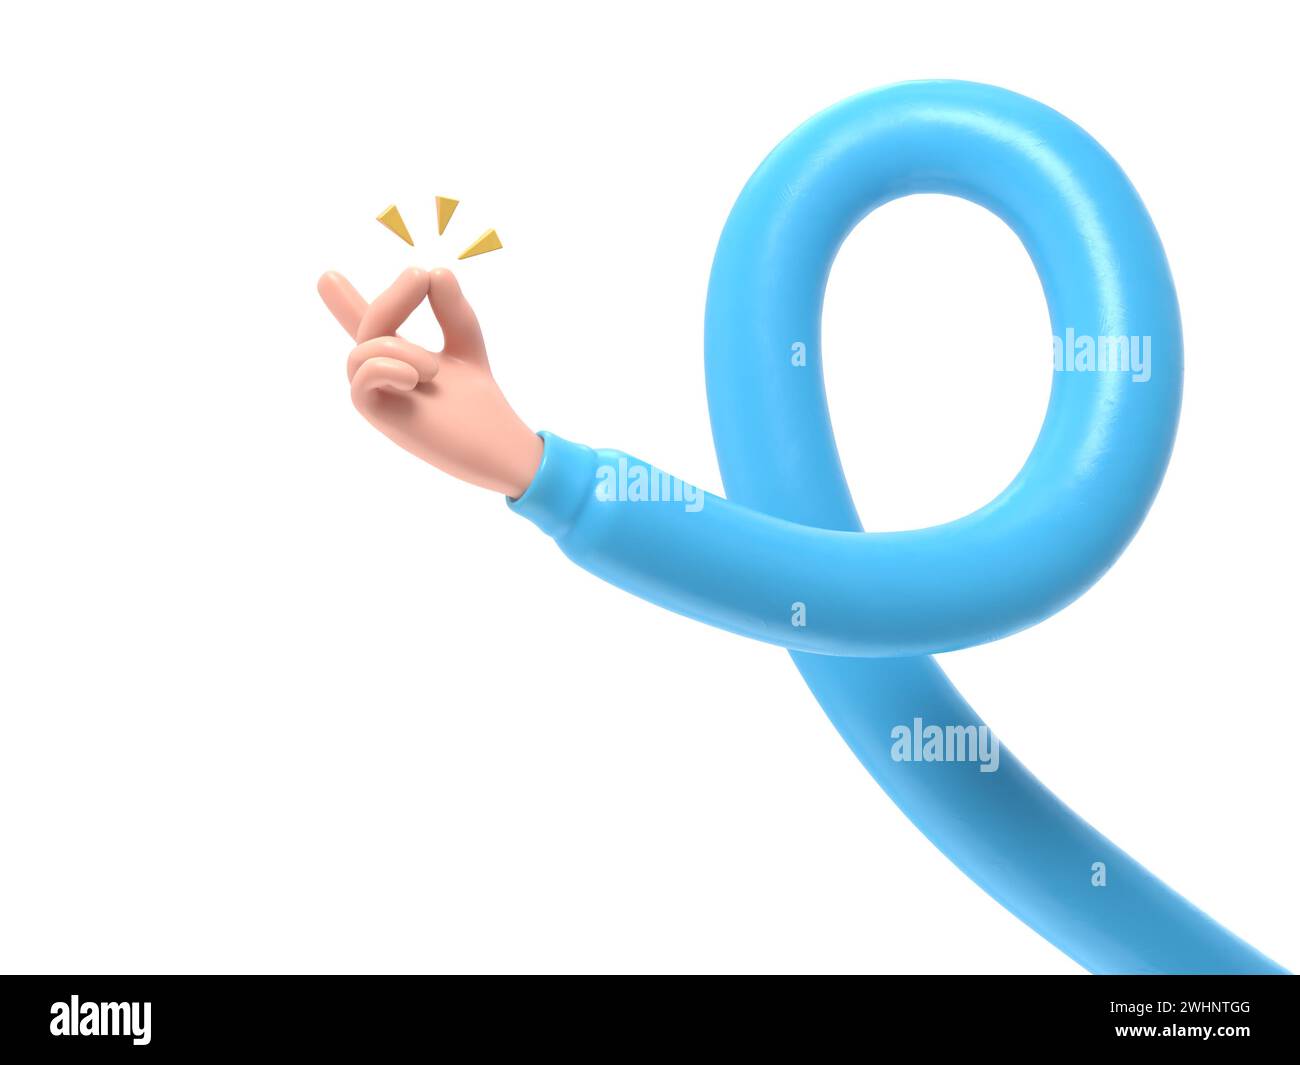 Cartoon Gesture Icon Mockup.Cartoon hand with dark blue sleeves showing snap gesture with a gold sound, light skin tone, 3D rendering on white backgro Stock Photo